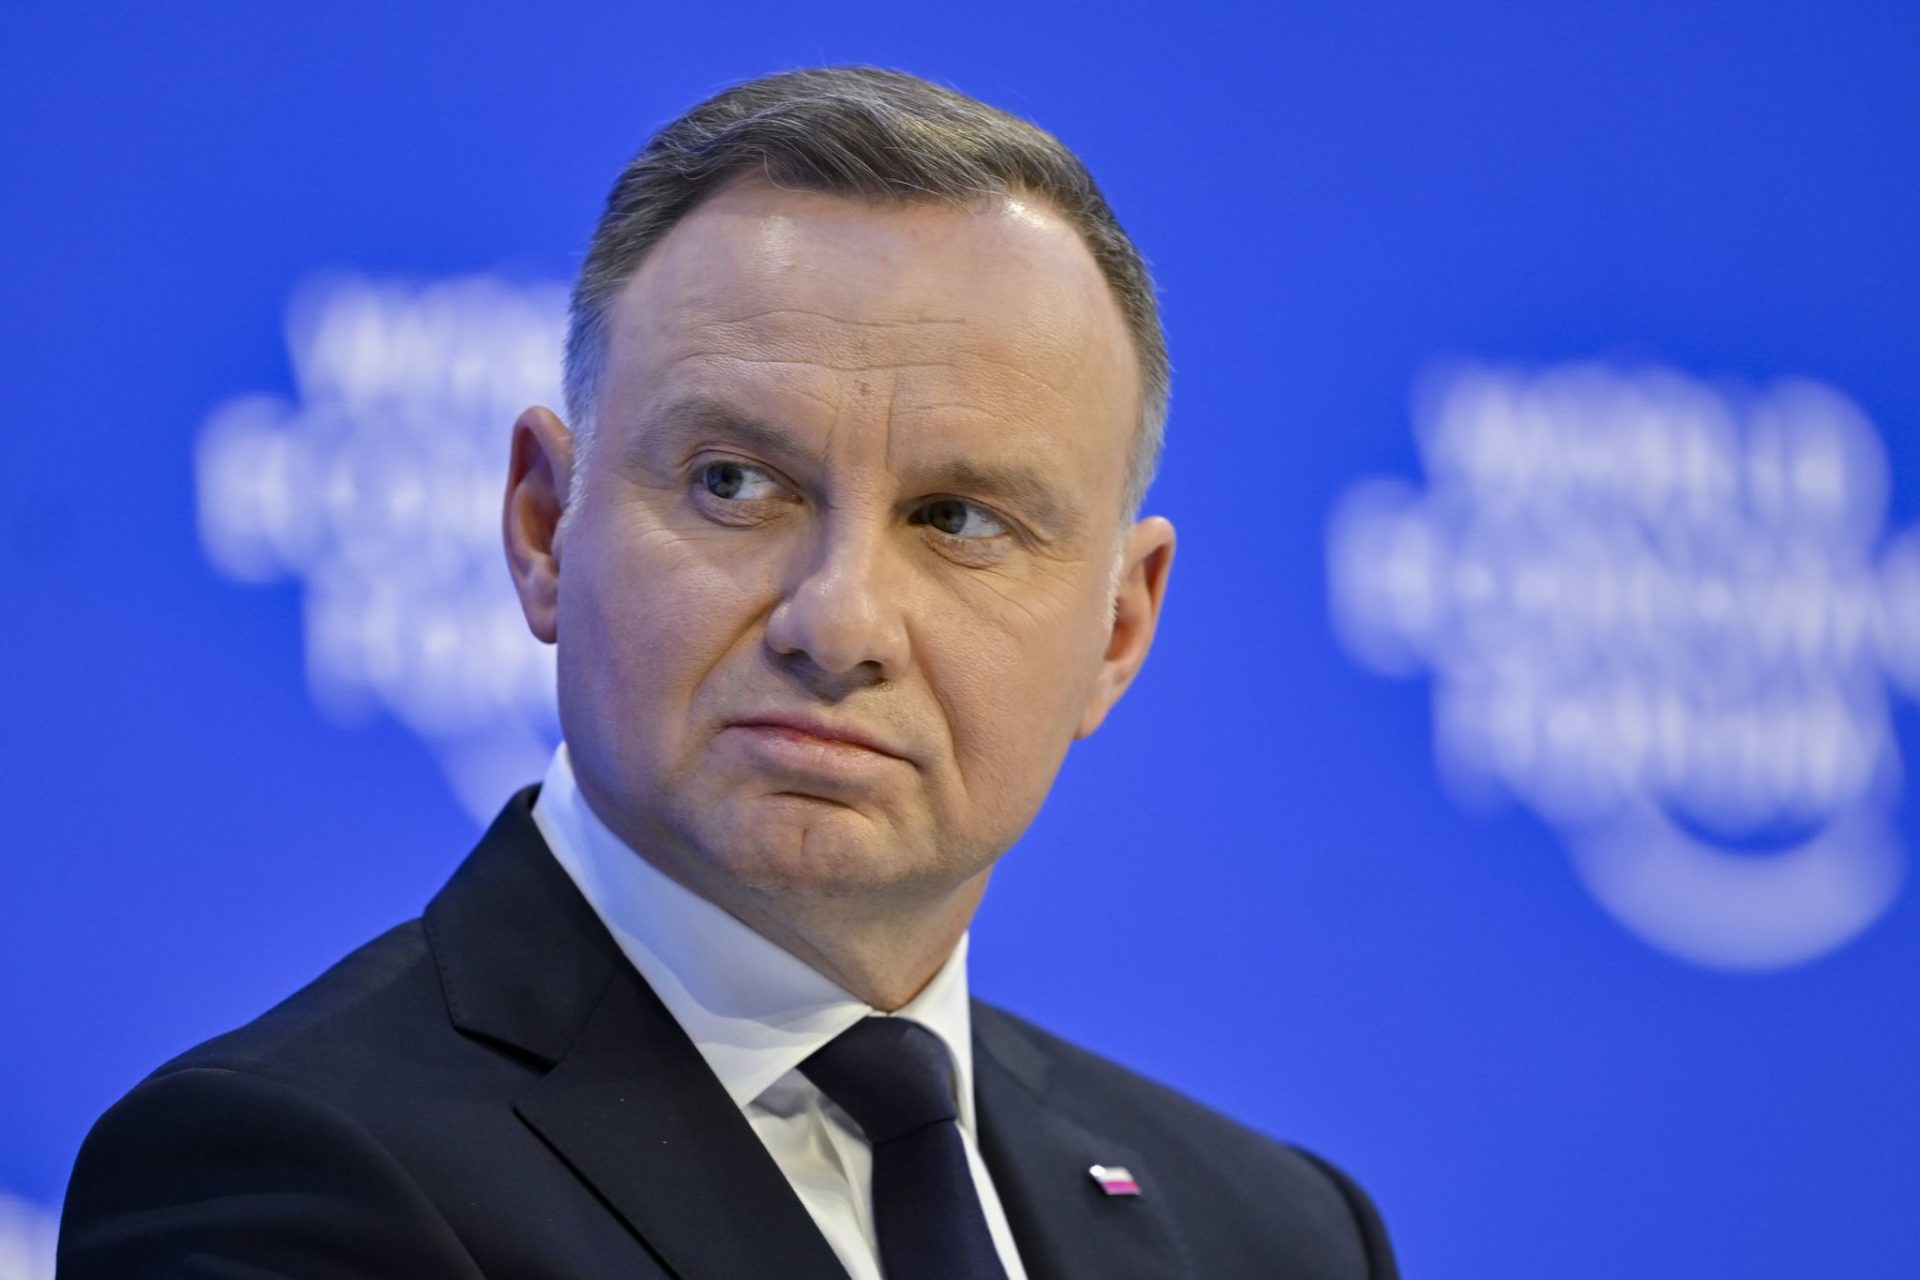 Europe in brief: Poland questioned over “Russian influence” law